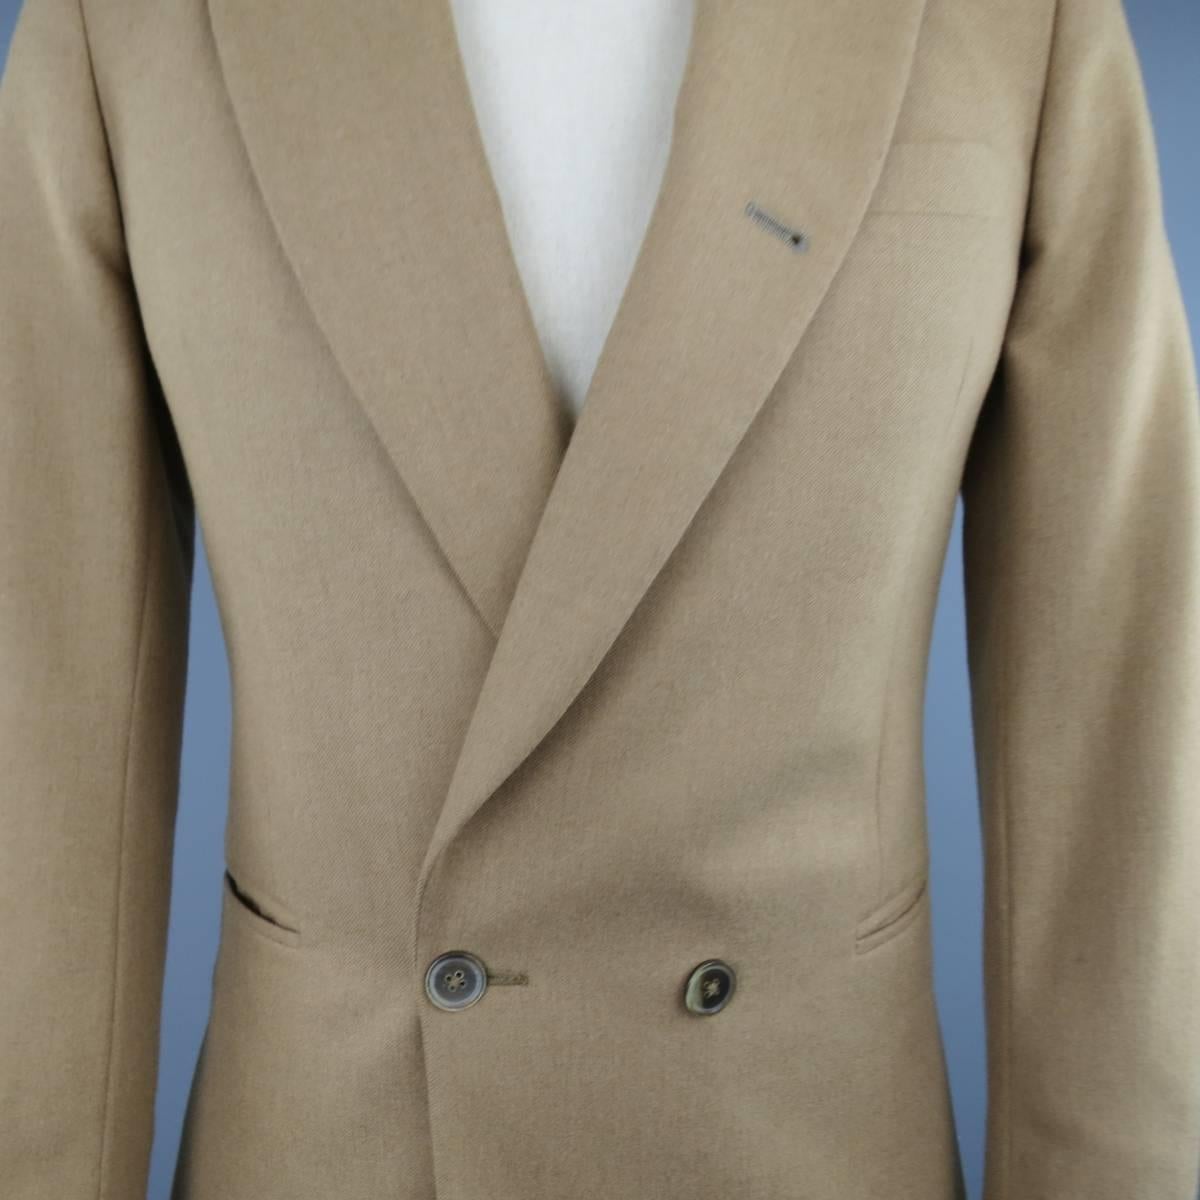 PAUL SMITH Sport Coat consists of camel hair material in a tan color tone. Designed in a double-breasted, peak lapel collar and single button front. Top pocket square and bottom inseam pockets. 4-button cuffs, double back vent and full lining. Made